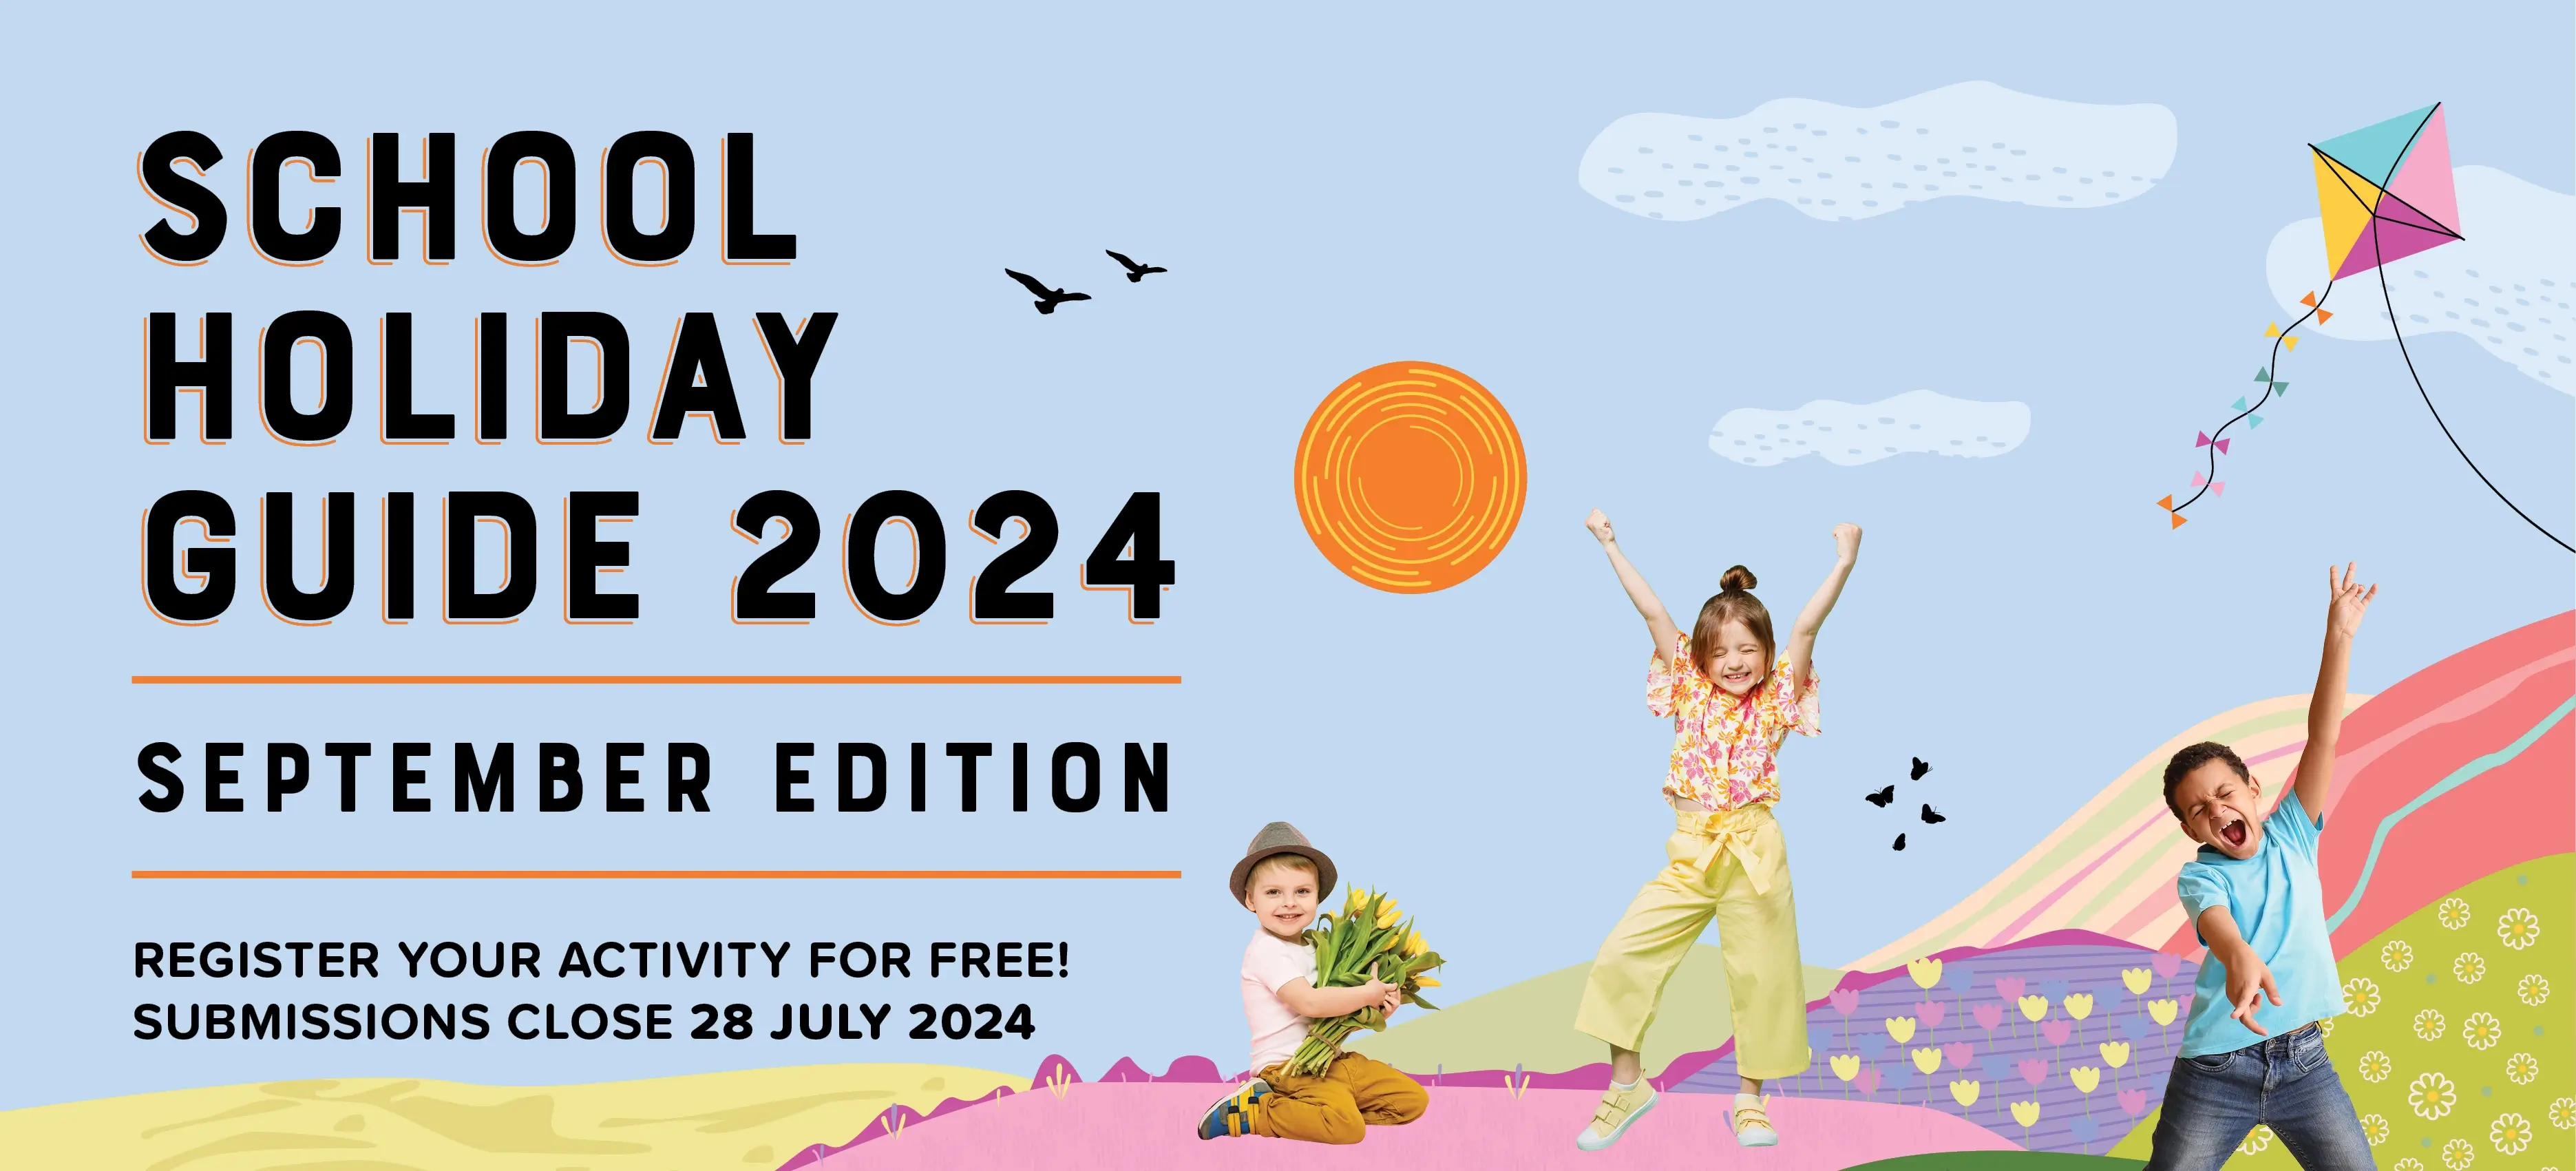 School Holiday Guide 2024 - June July Edition - Download Your Free Copy Now!